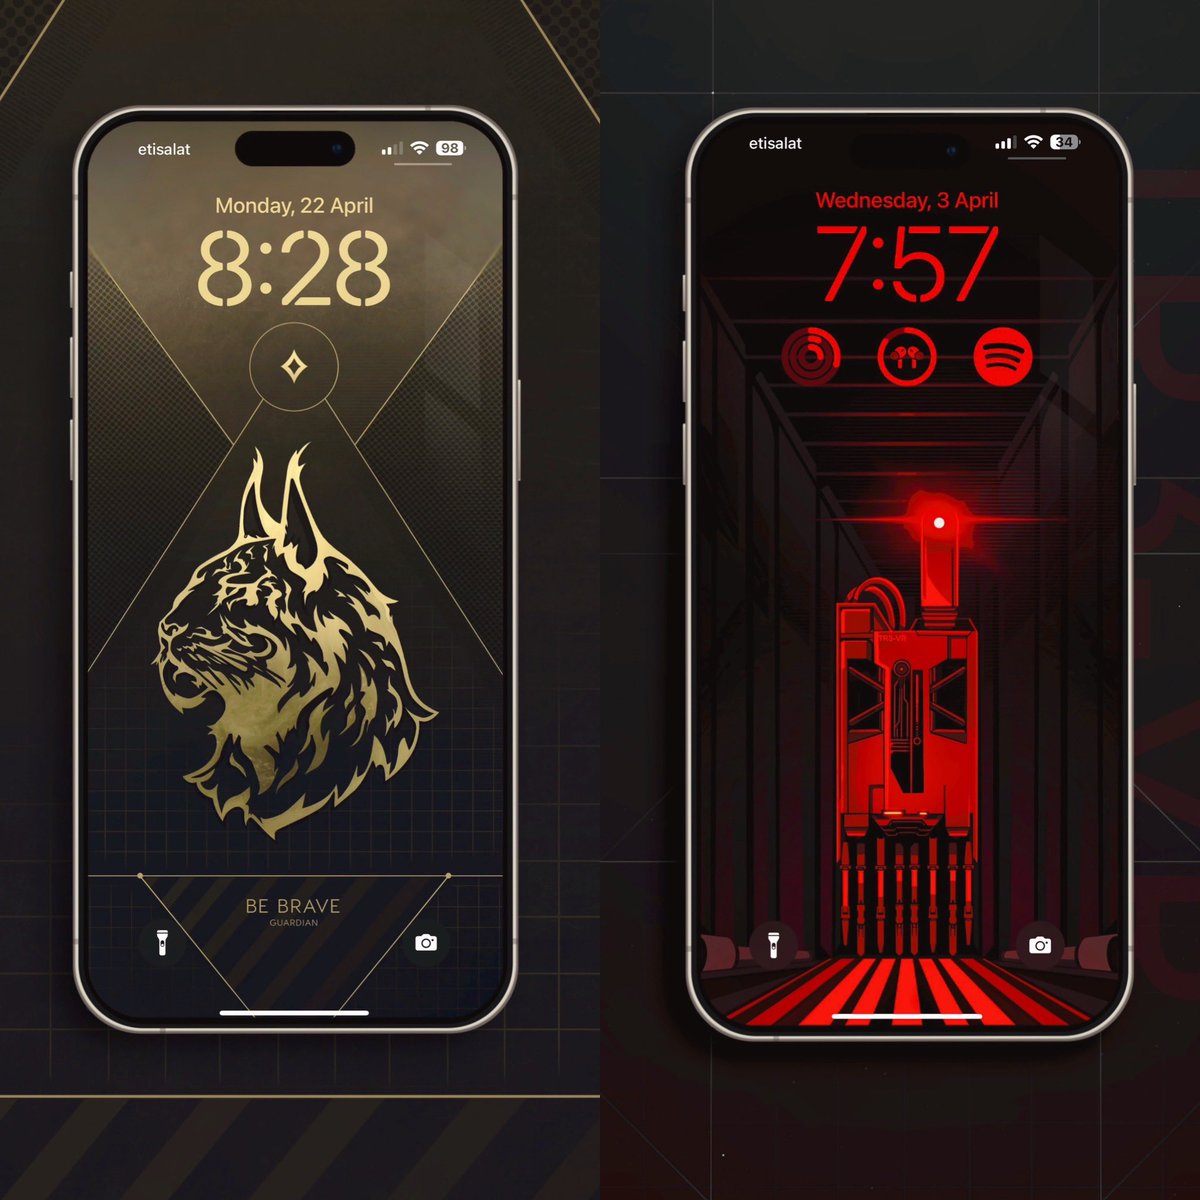 Reminder both these #Destiny2 wallpapers are free to grab in the link below 🔻

#Destiny2Art